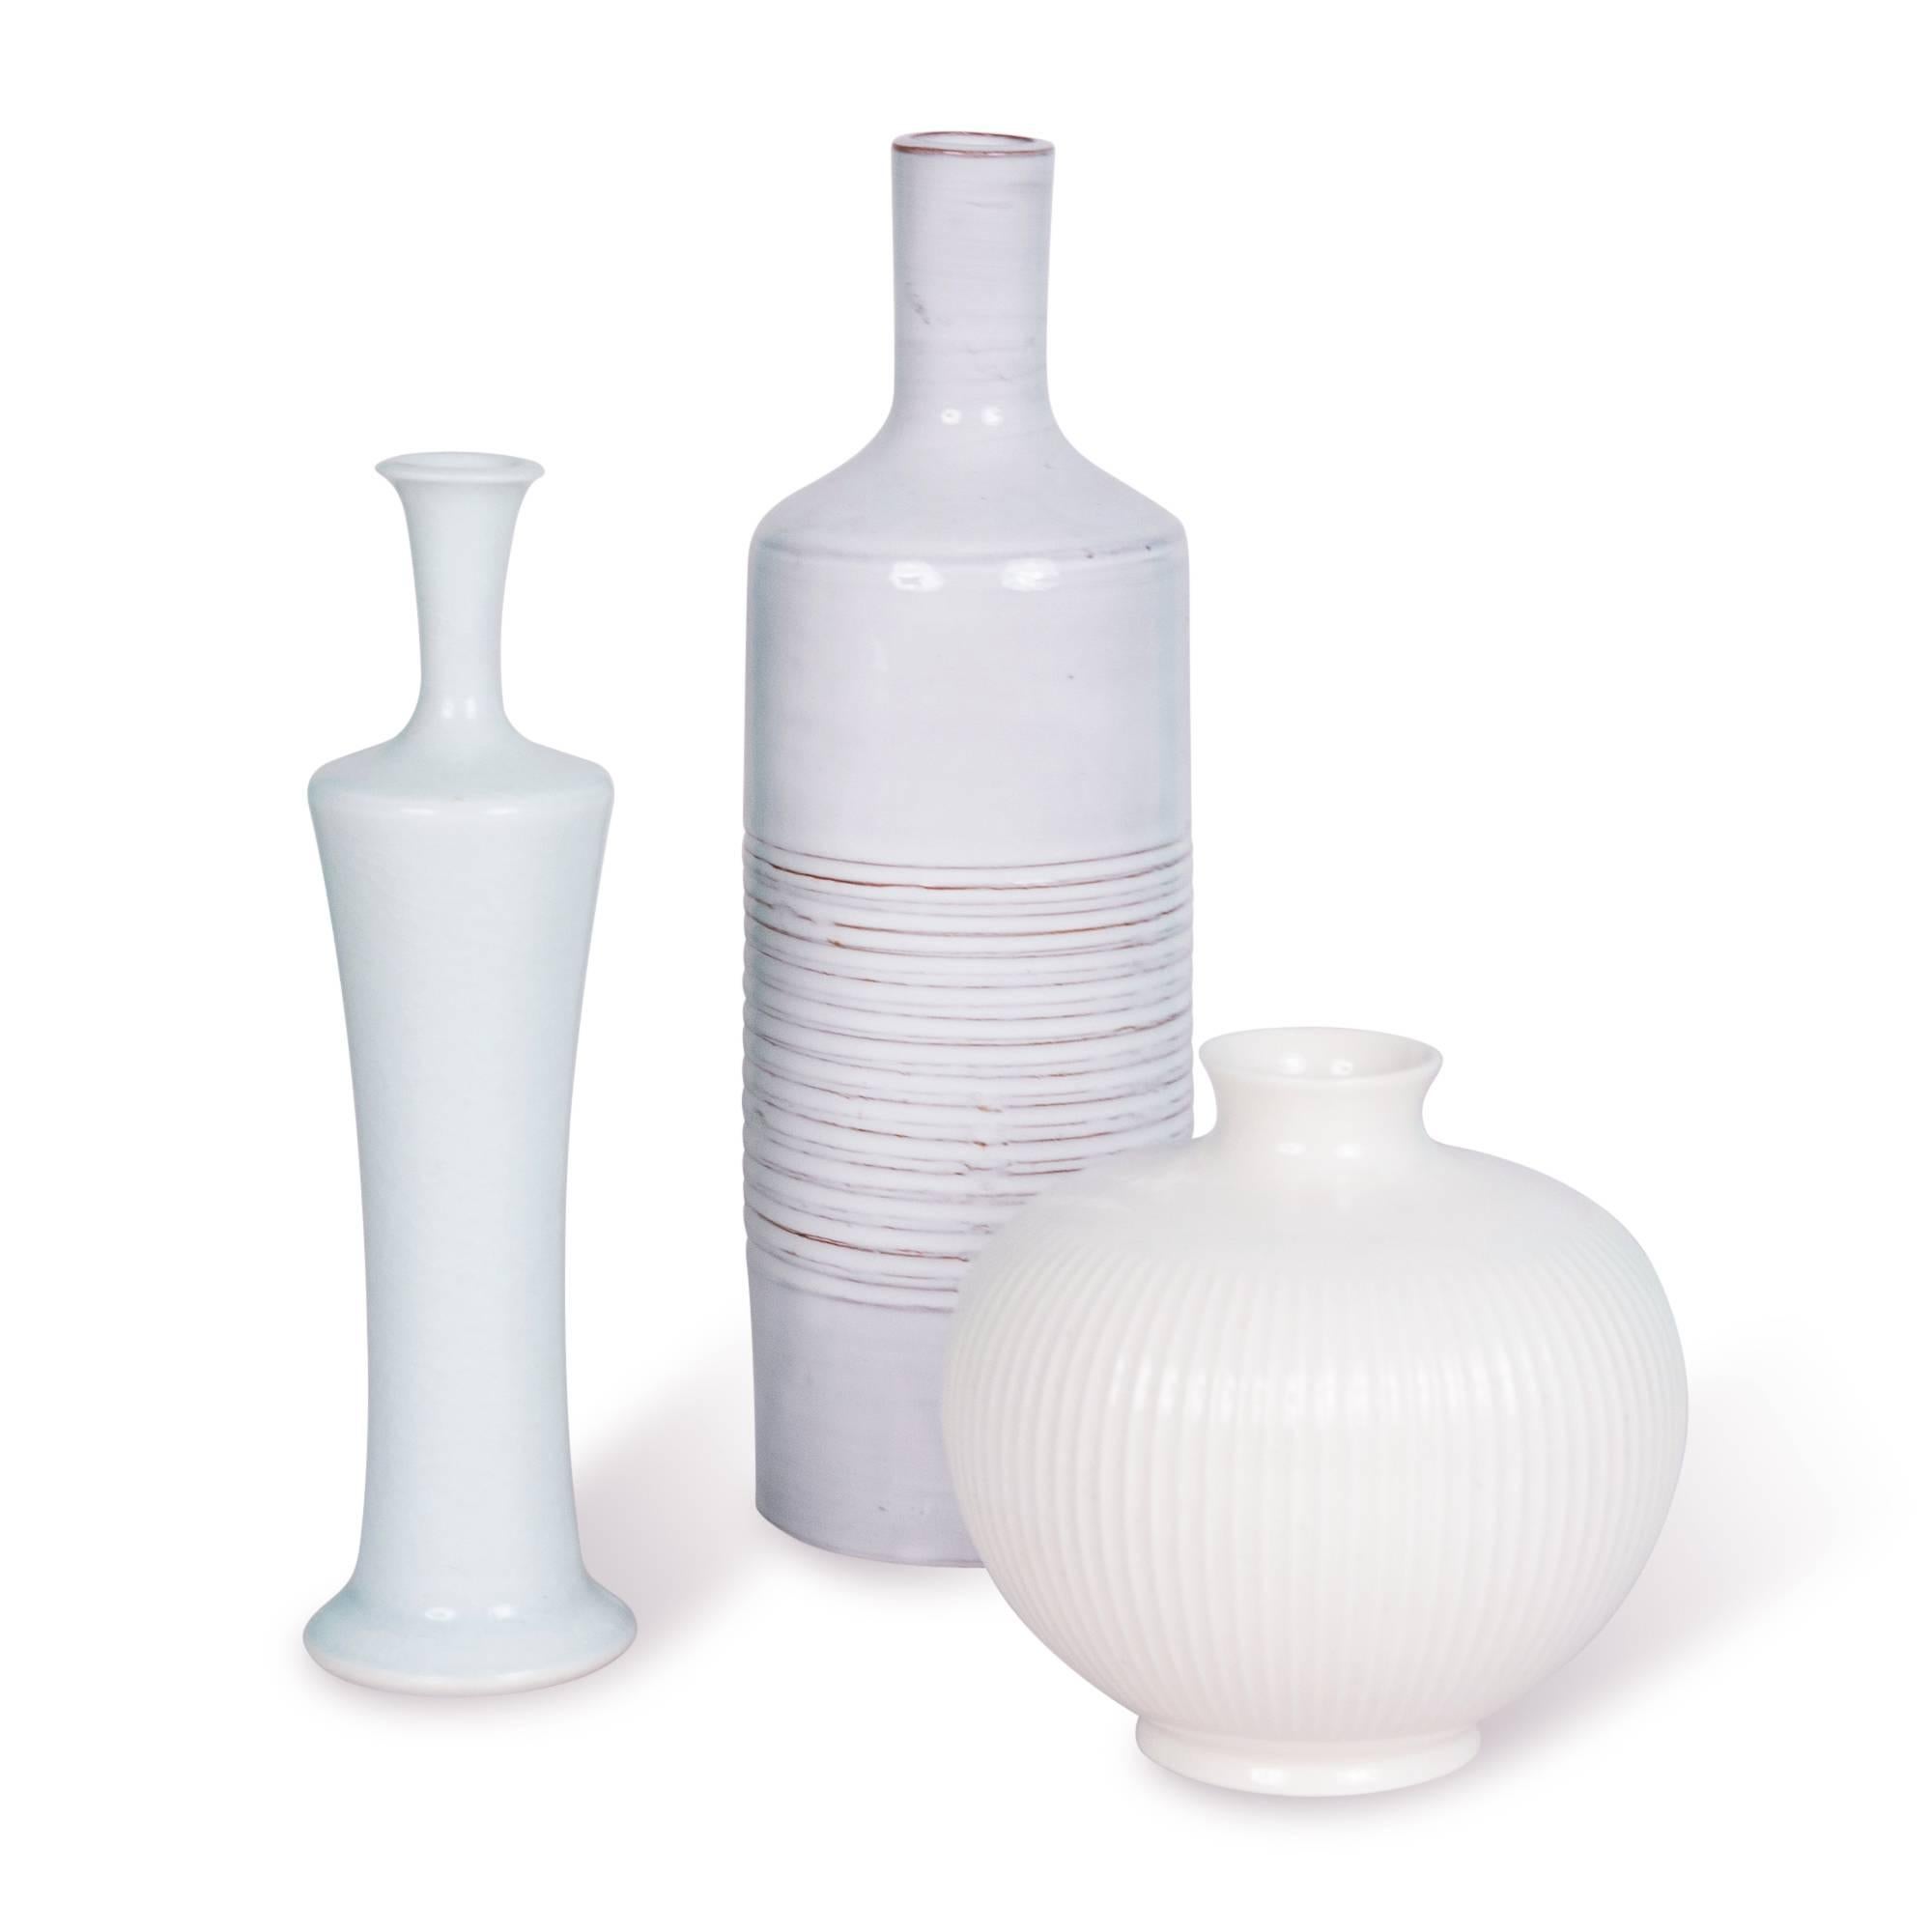 Set of three:
On left: Porcelain bulbous form vase, with grooved sides and flared rim by Royal Copenhagen, Denmark, 1960s. Measures: Height 4 in, diameter 4 1/2 in.

Center: Grey-white bottle form ceramic vase, with long neck, and grooved bands